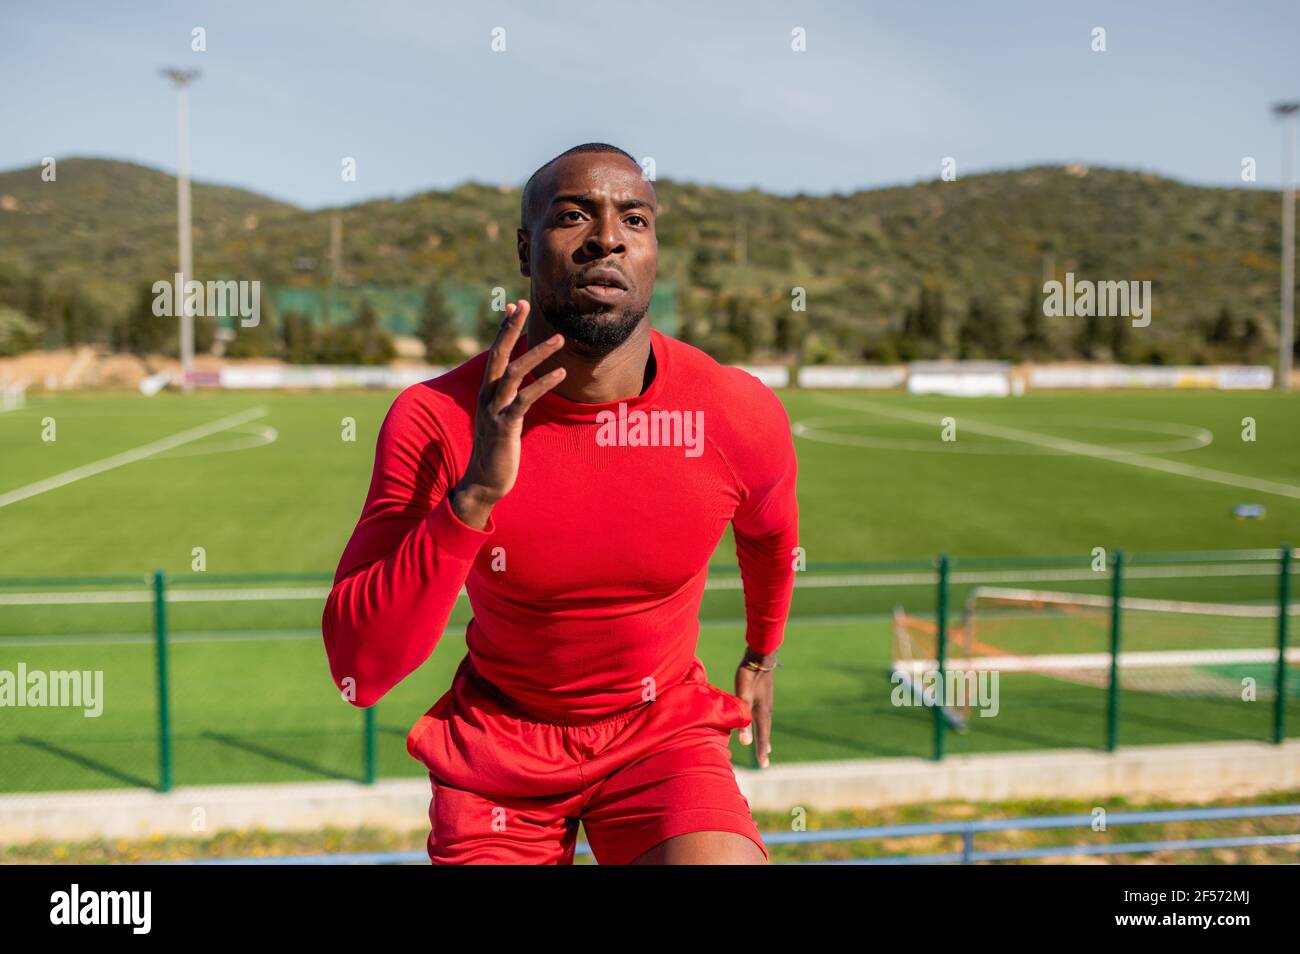 Black African sportsman running and training outdoors with field track on background. Stock Photo